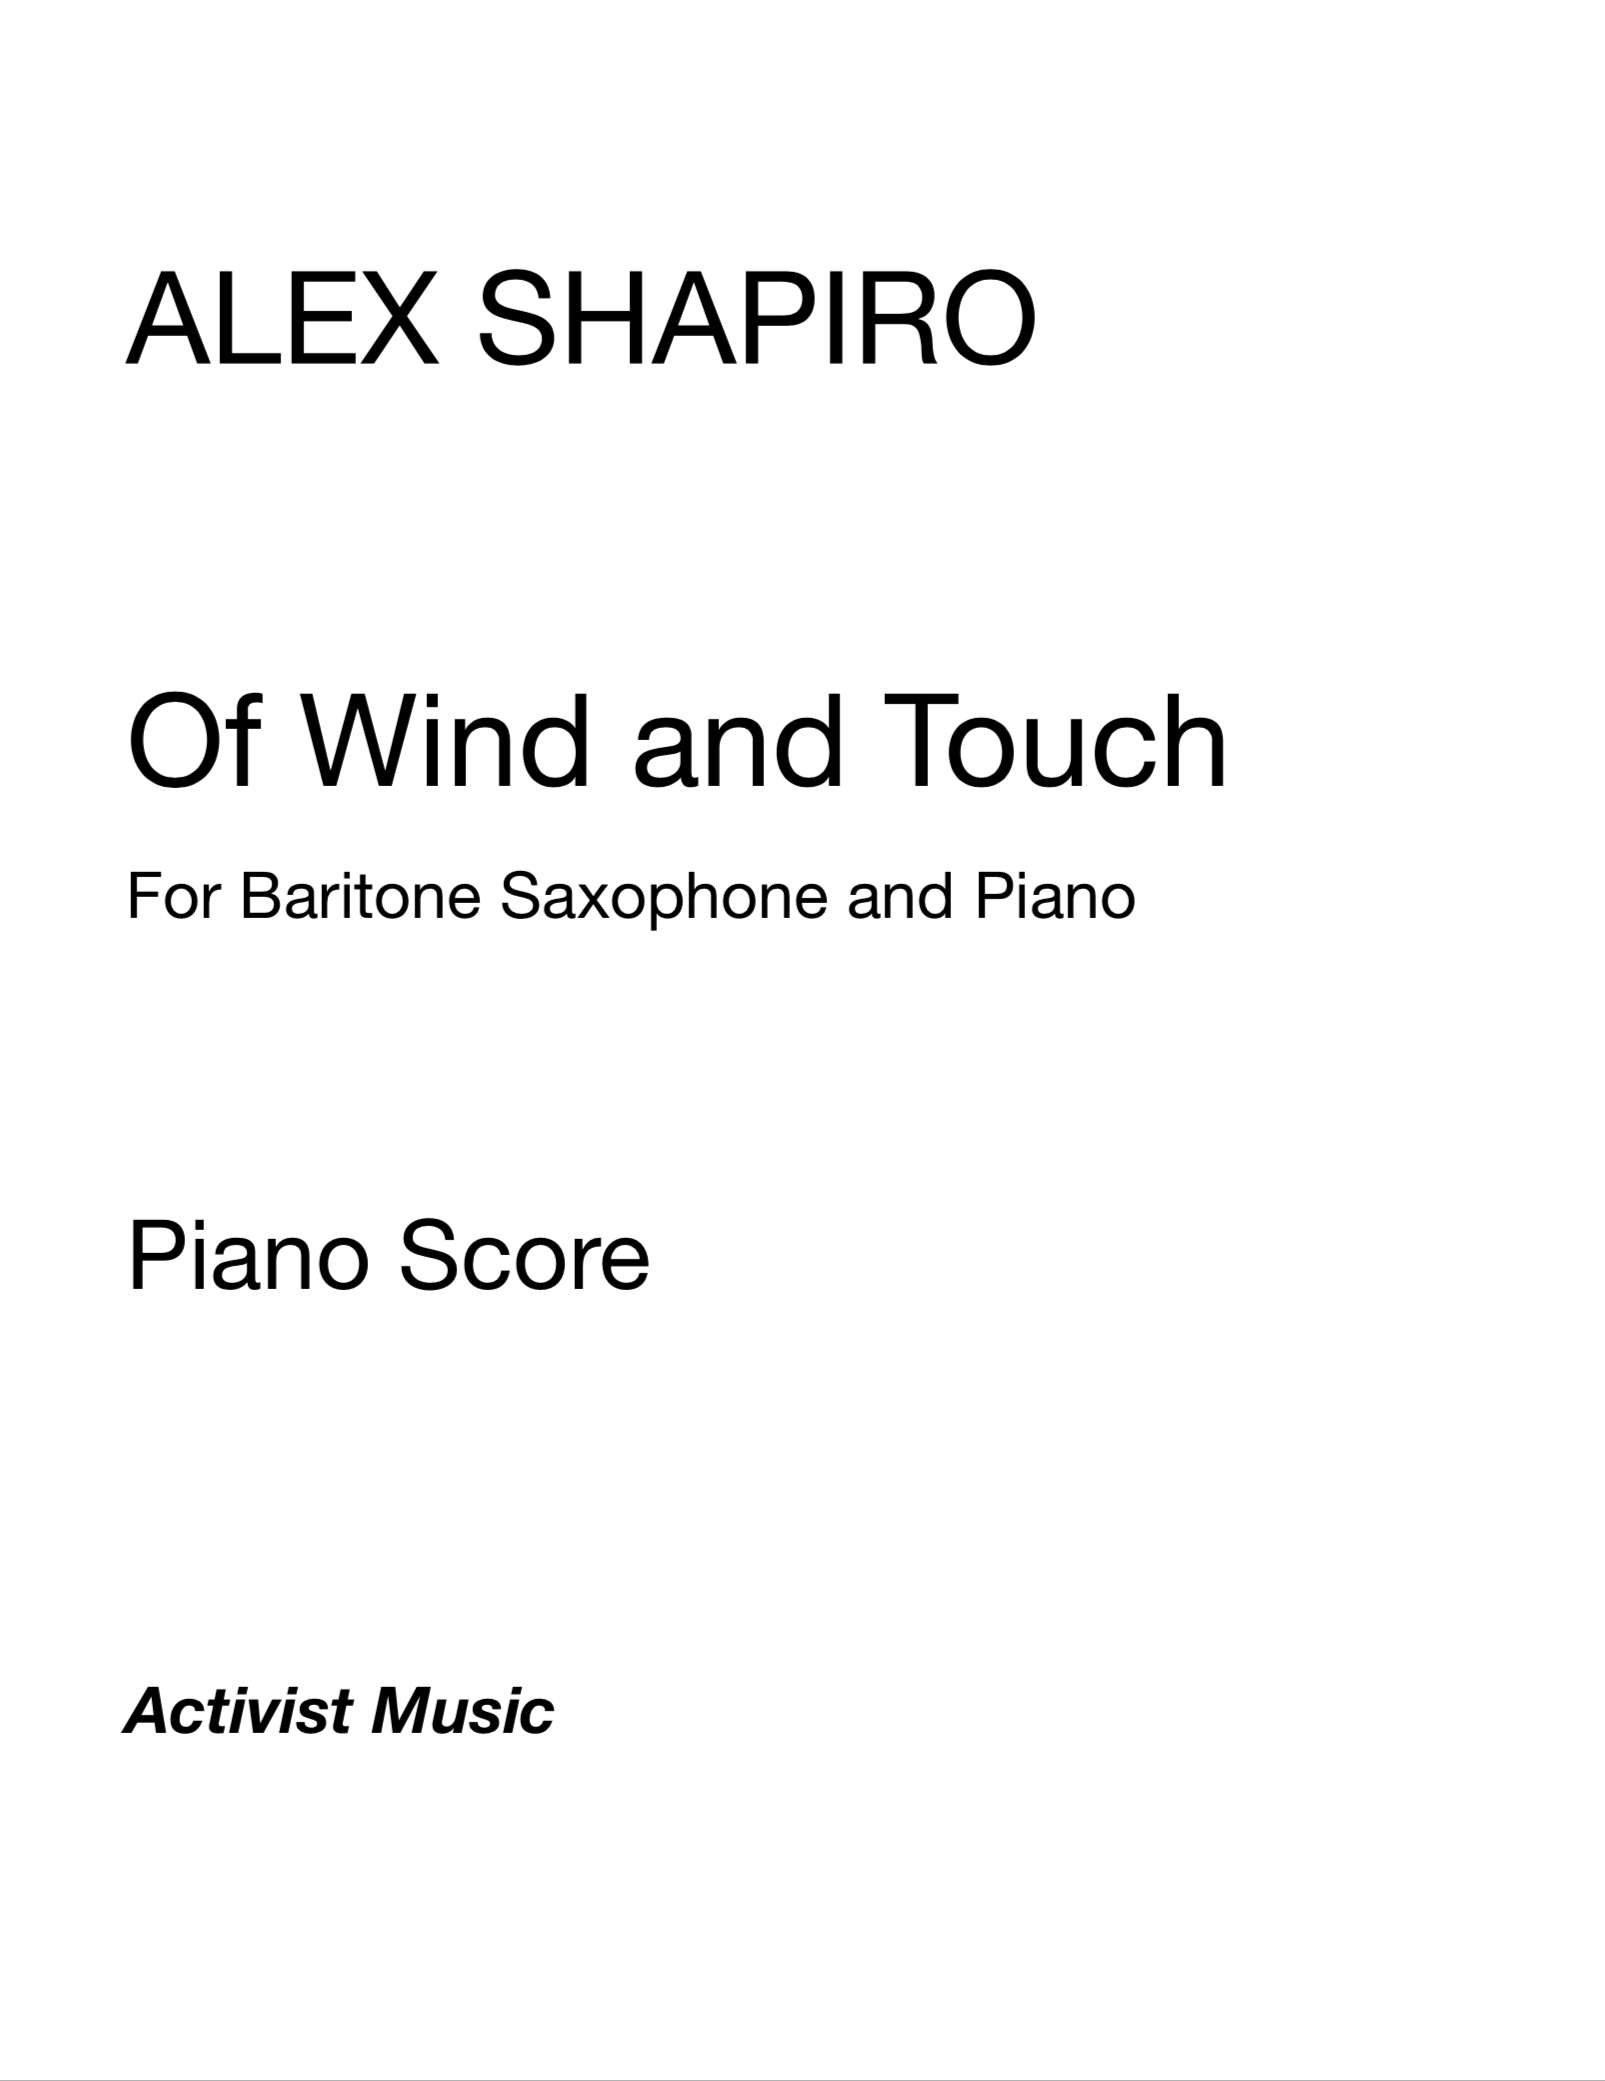 Of Wind And Touch by Alex Shapiro